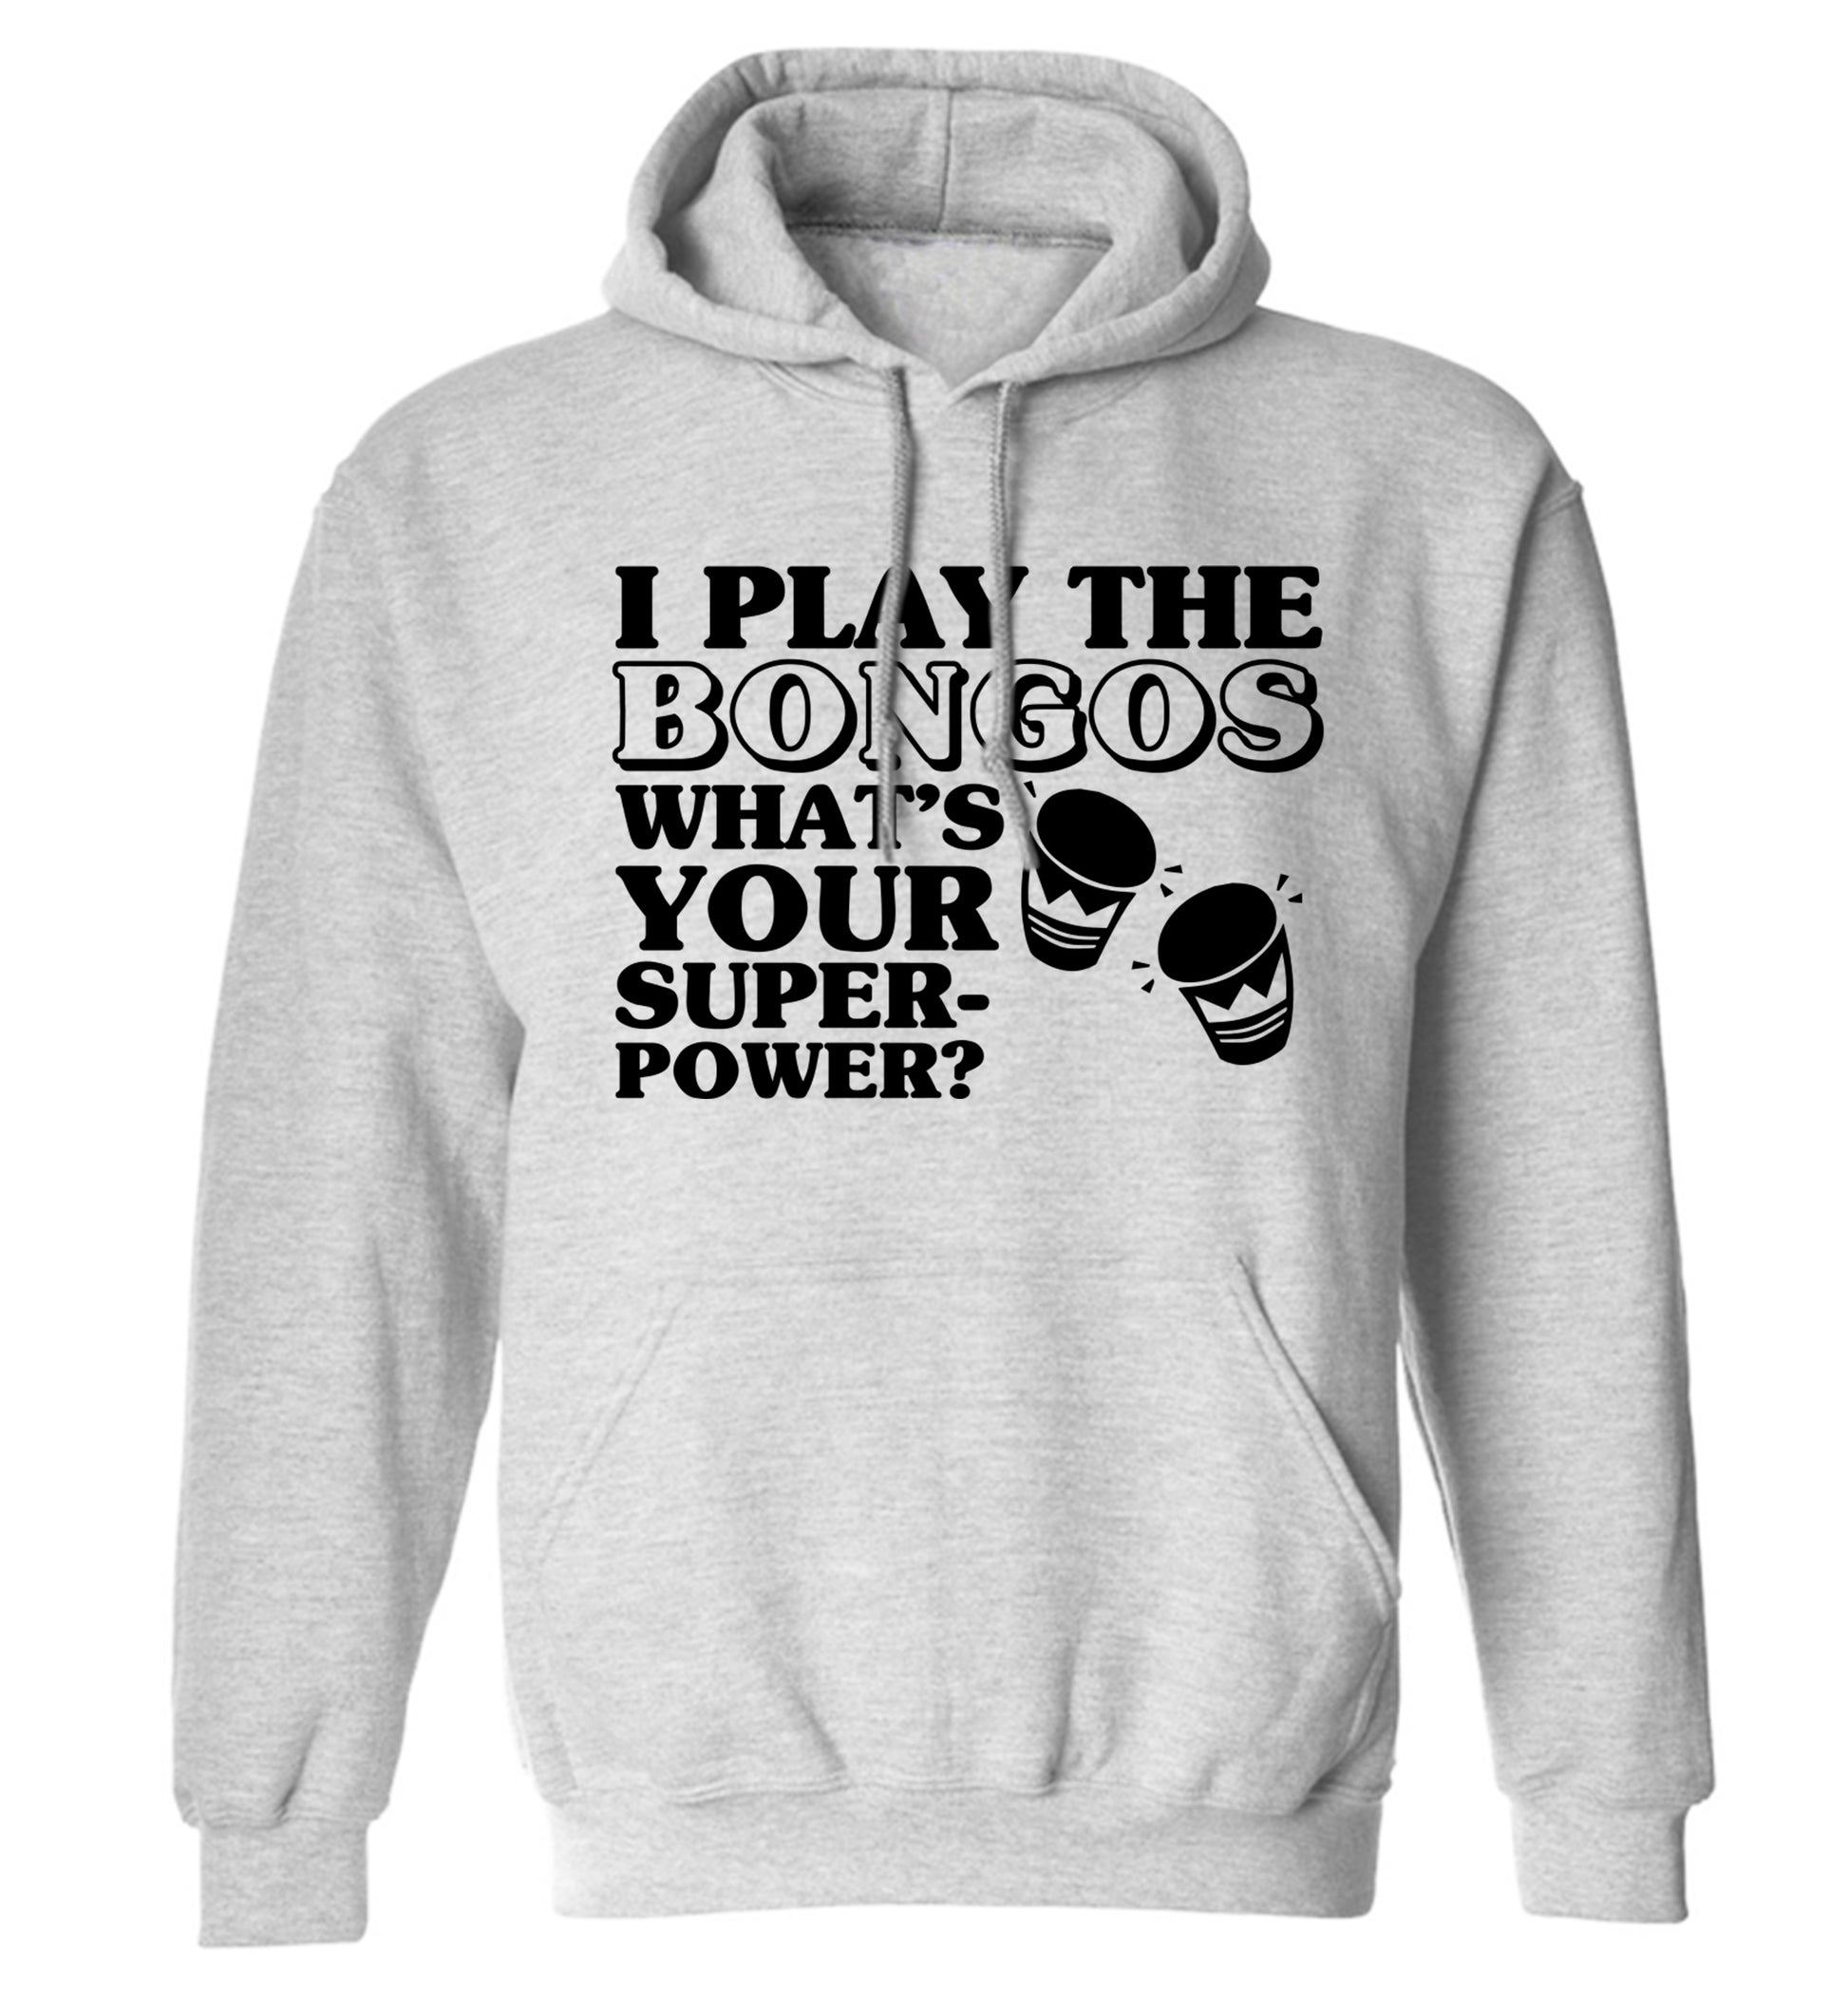 I play the bongos what's your superpower? adults unisexgrey hoodie 2XL